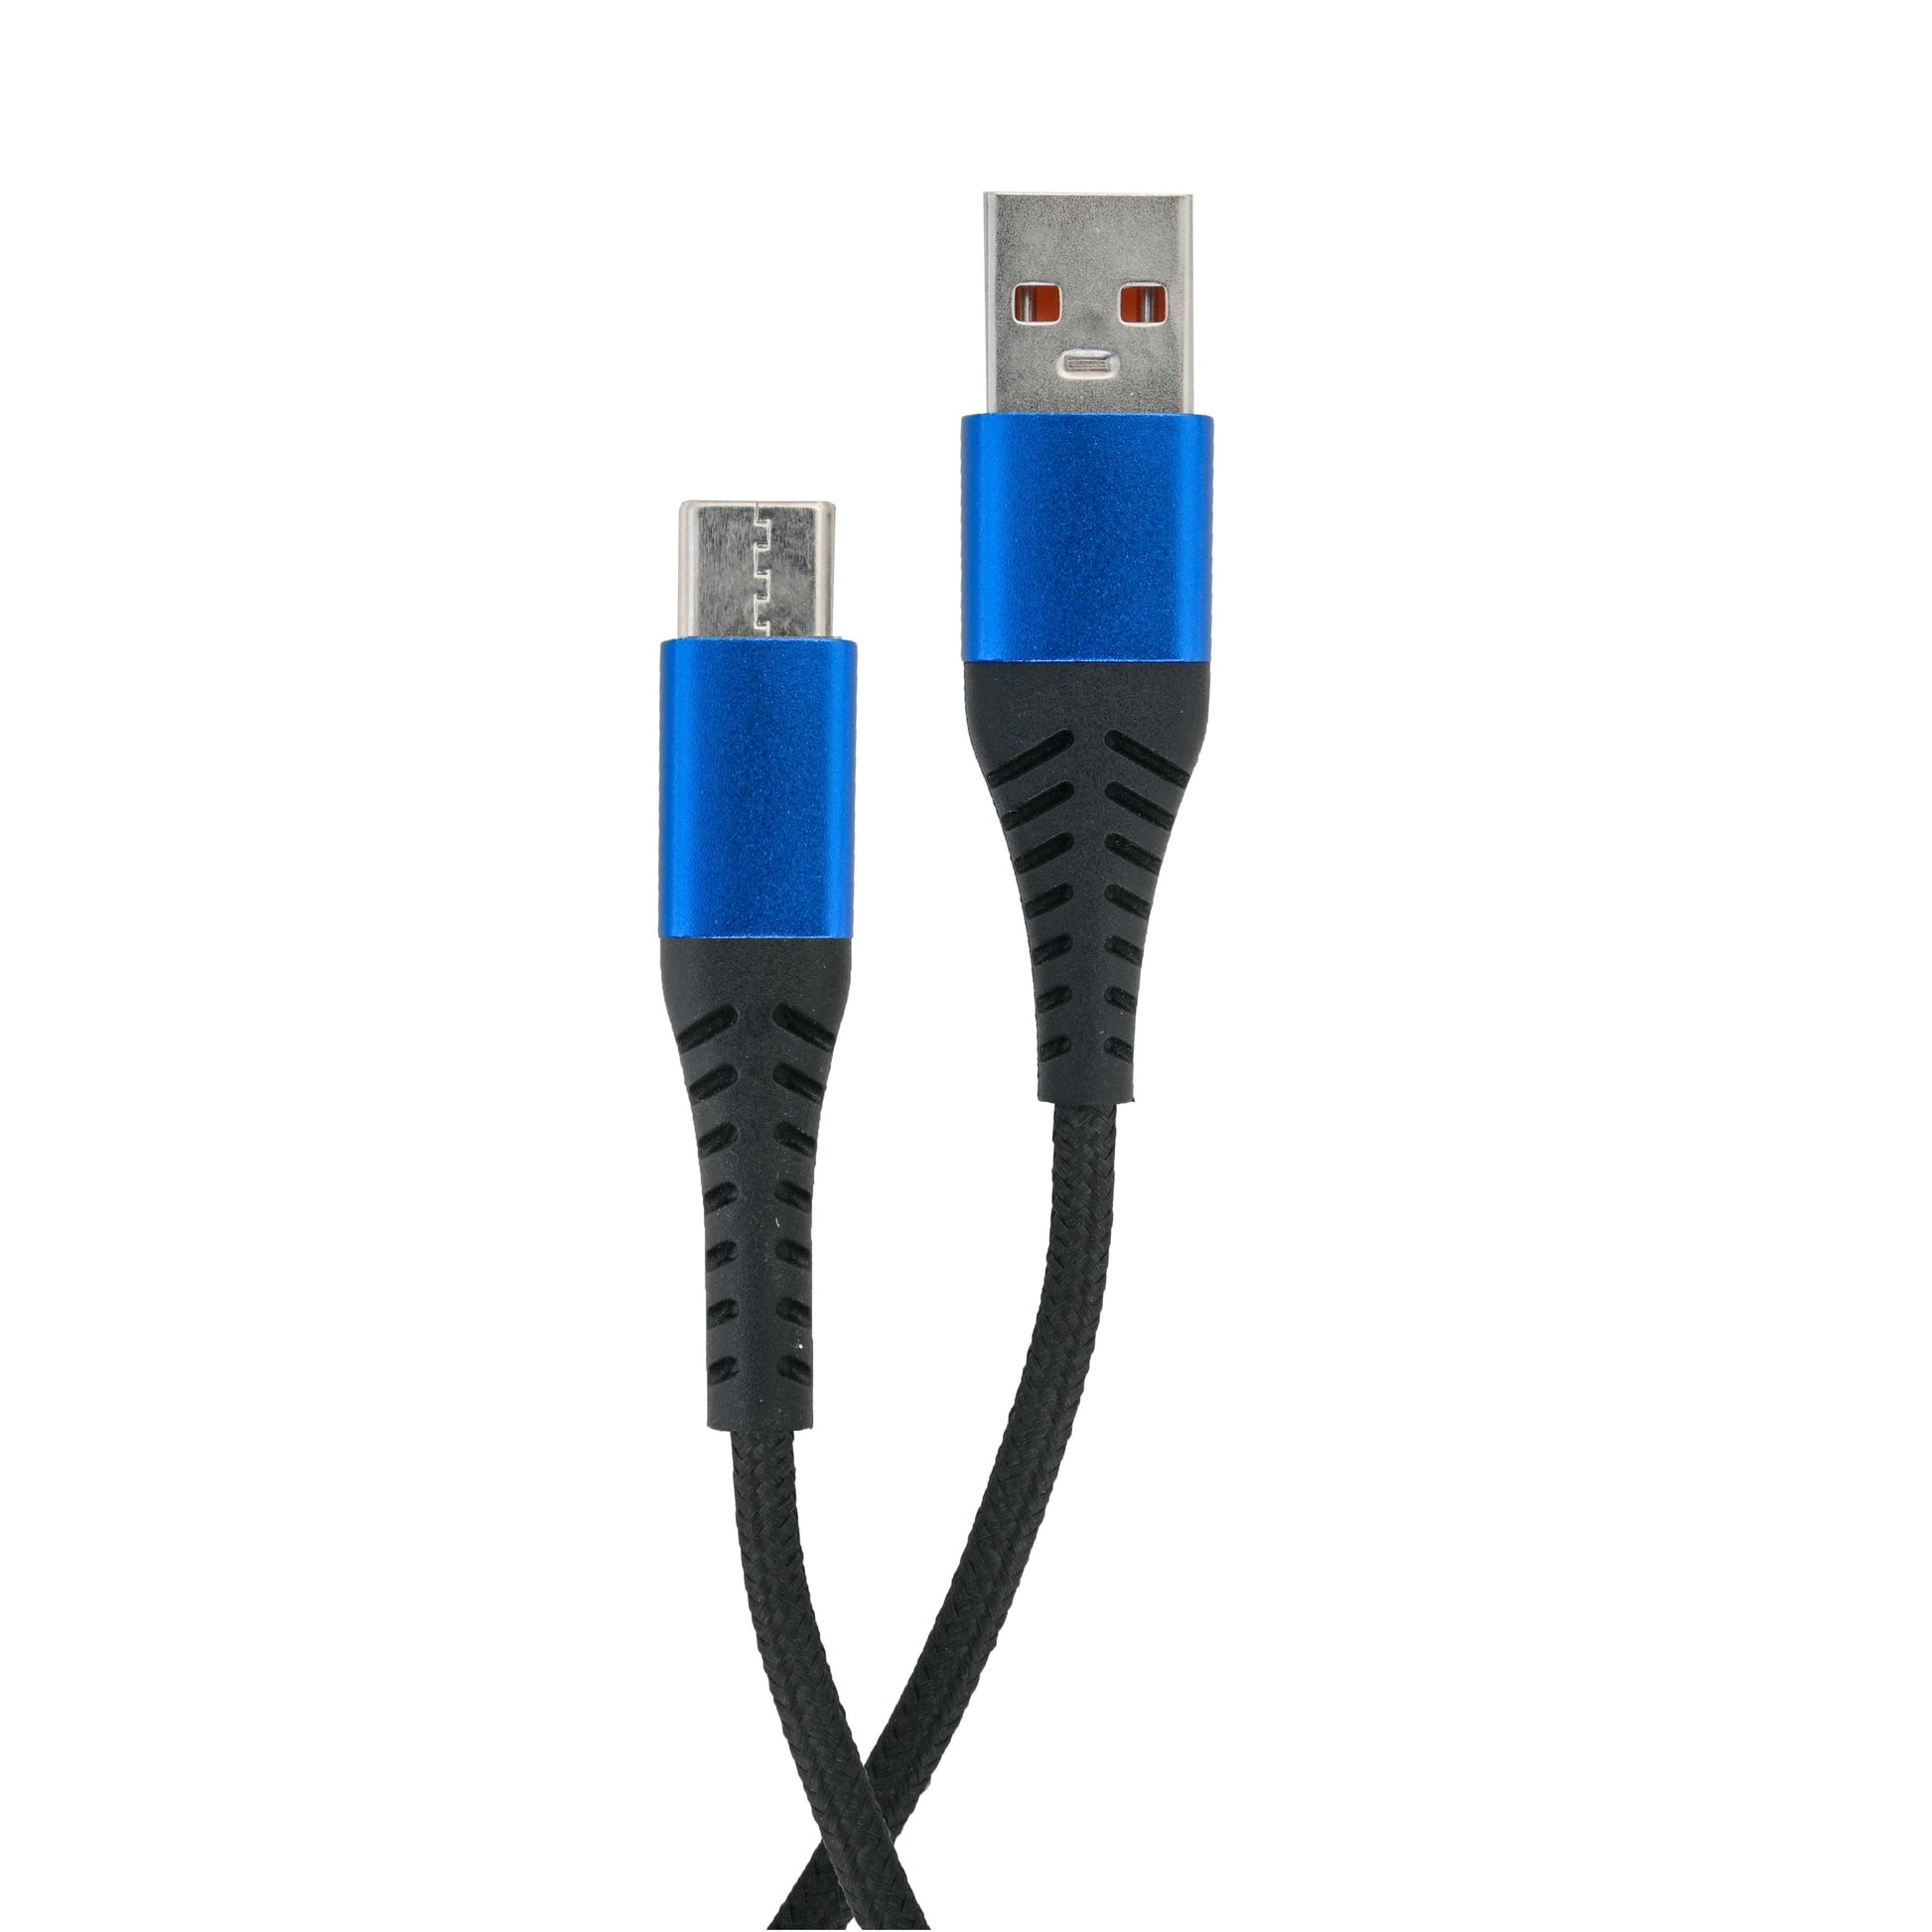 X Plus Type C Fast USB Charging Cable -1 Meter Mobile Accessories CPUS Blue 